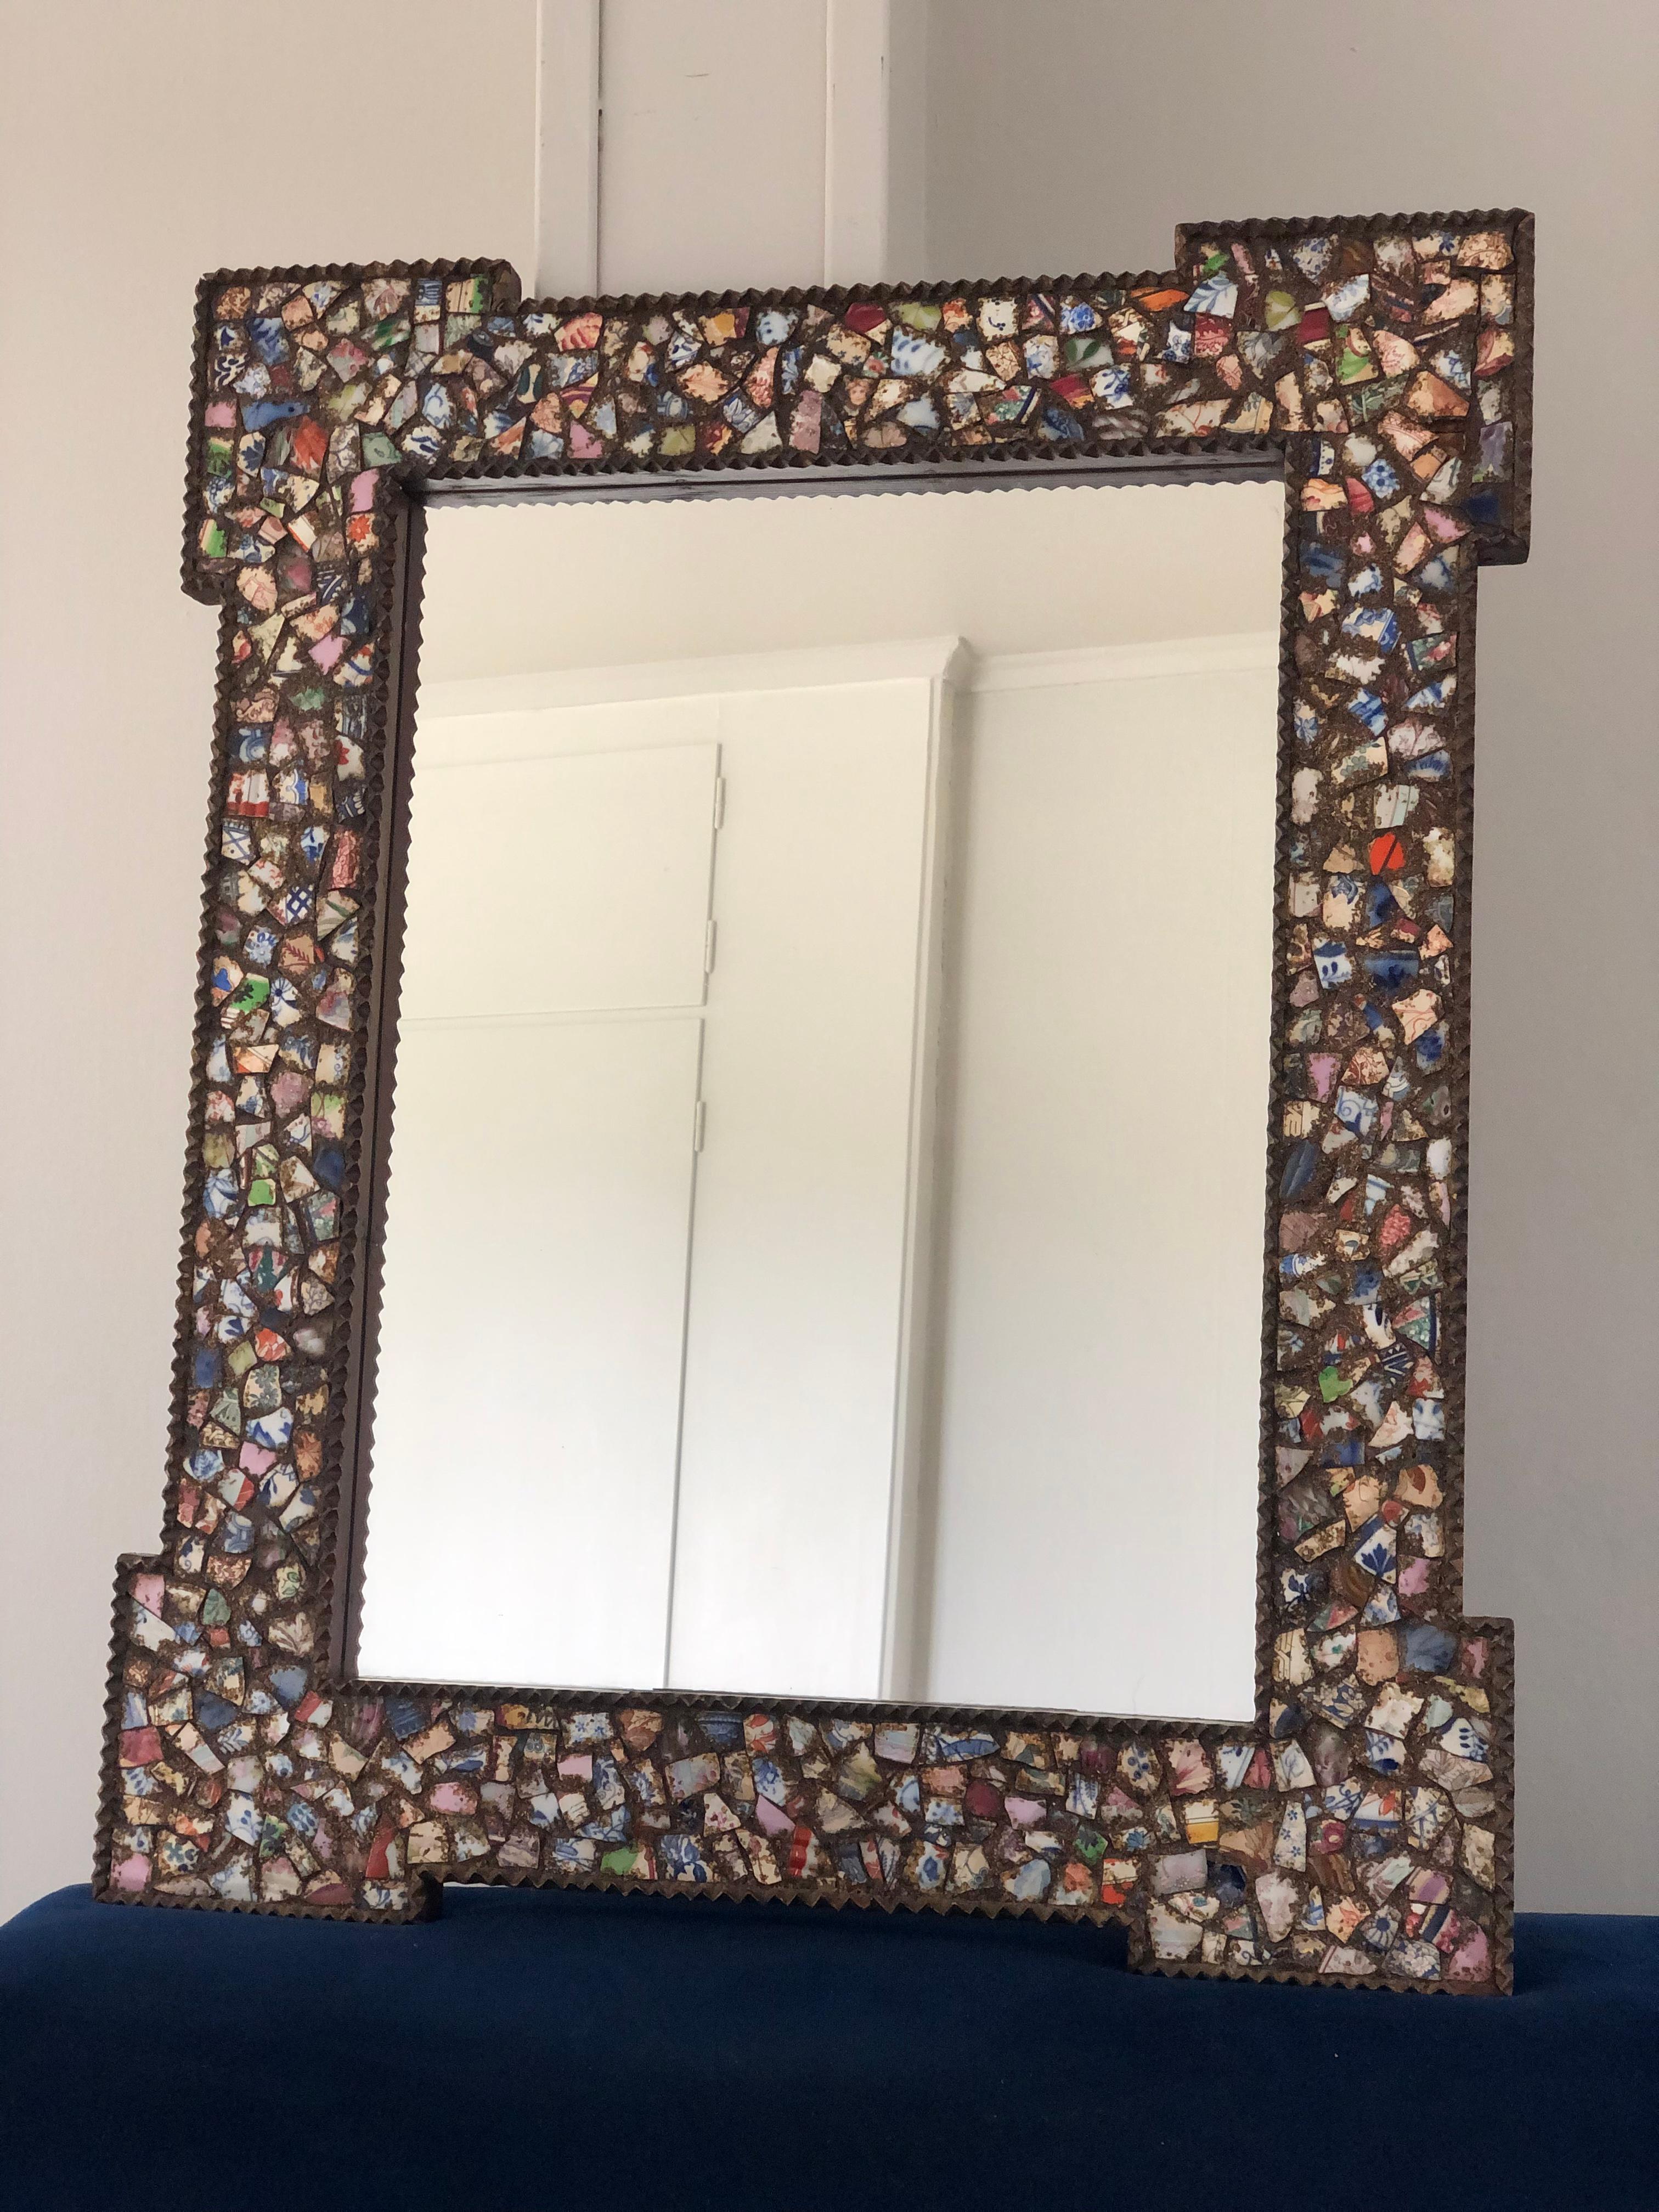 A pair handcrafted mirrors decorated with broken crockery. The colorful mosaic mirrors are decorated with all kinds of crockery and filled with gilt. The wooden edge of the frame has been carved.

Beautifully handmade and richly decorated mirror In